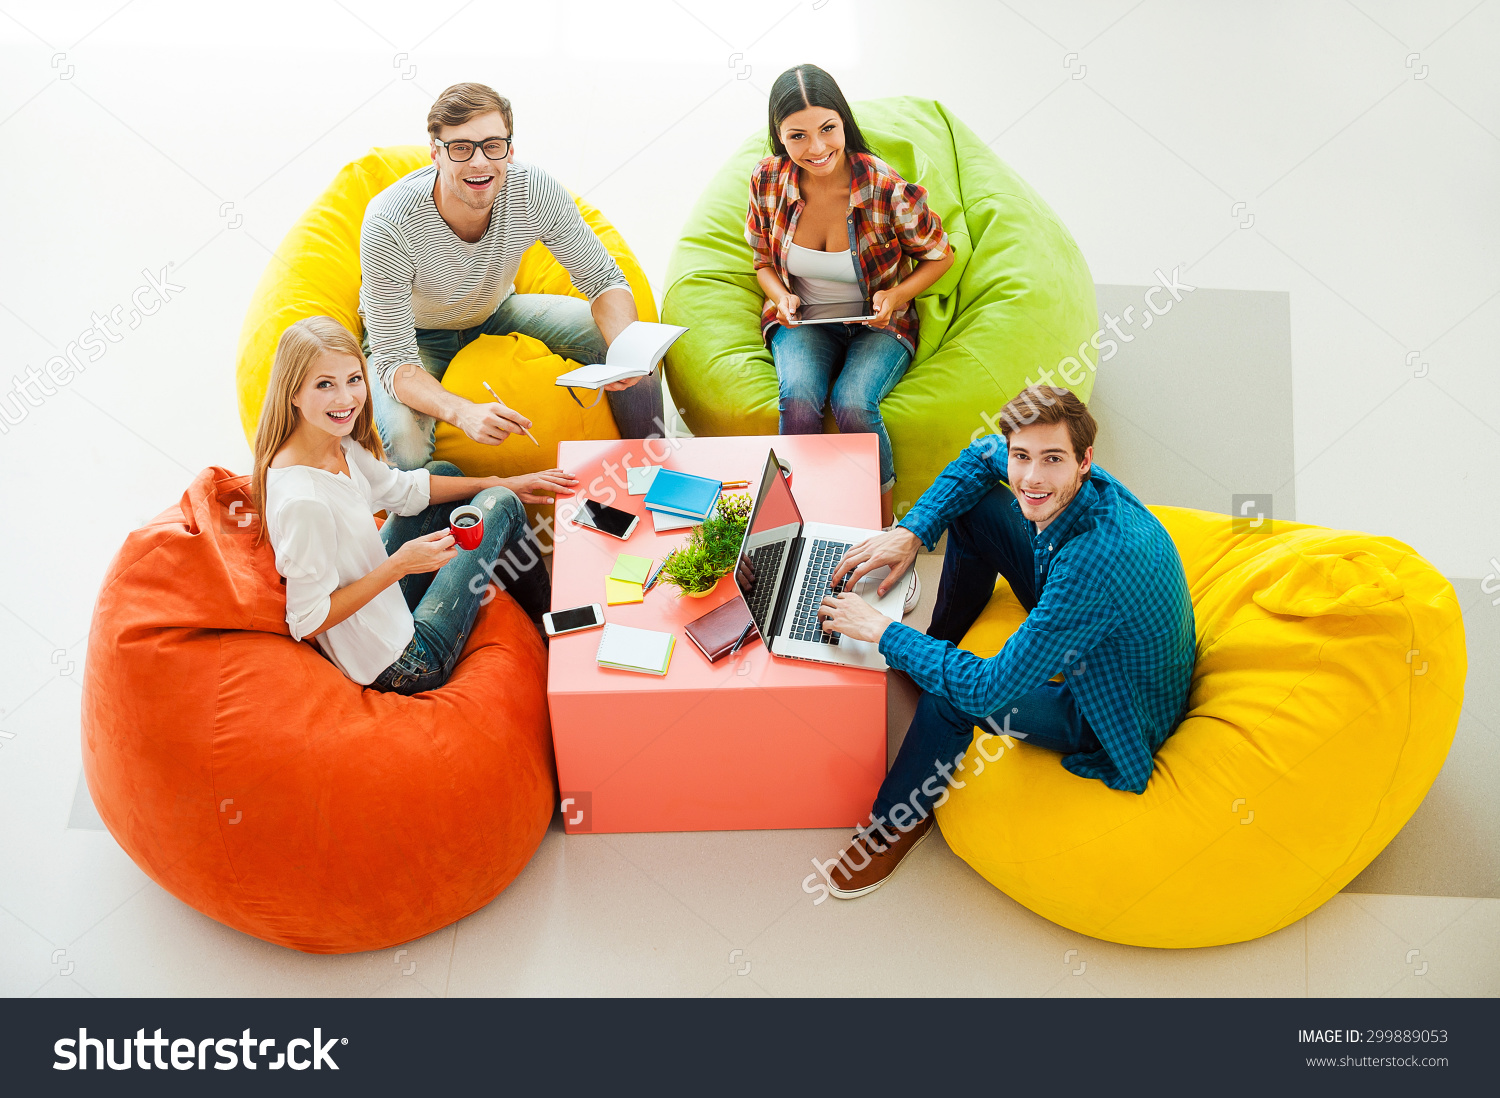 stock-photo-creative-work-space-top-view-of-four-cheerful-young-people-working-together-and-looking-up-while-299889053-1